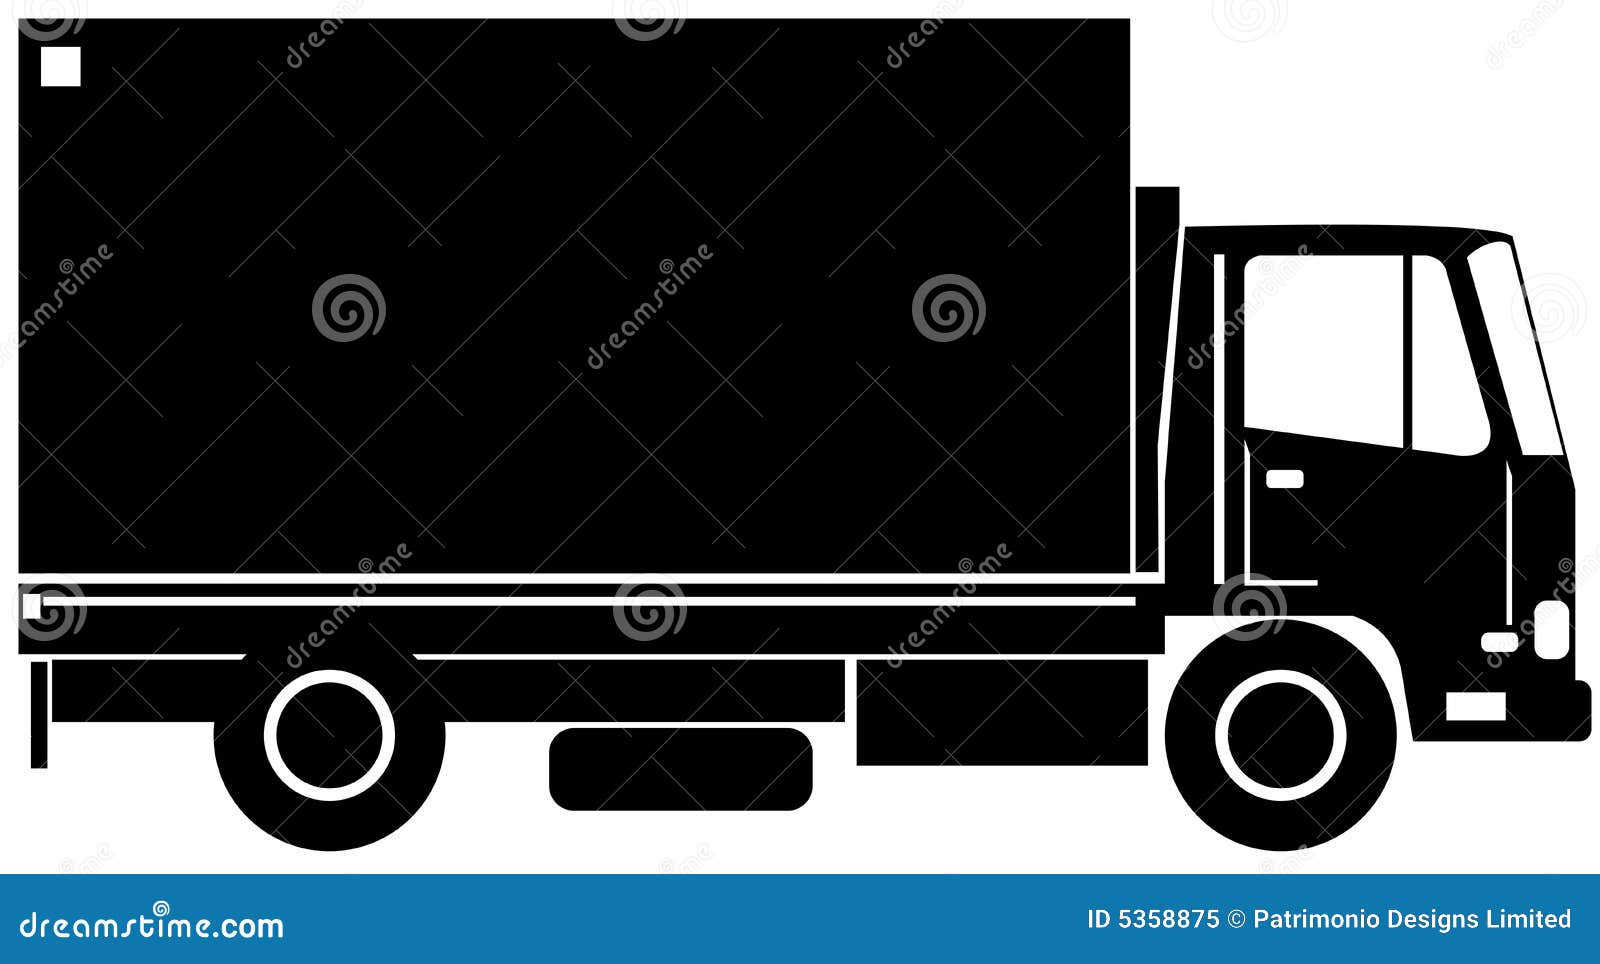 Delivery truck side view stock vector. Image of silhouette - 5358875